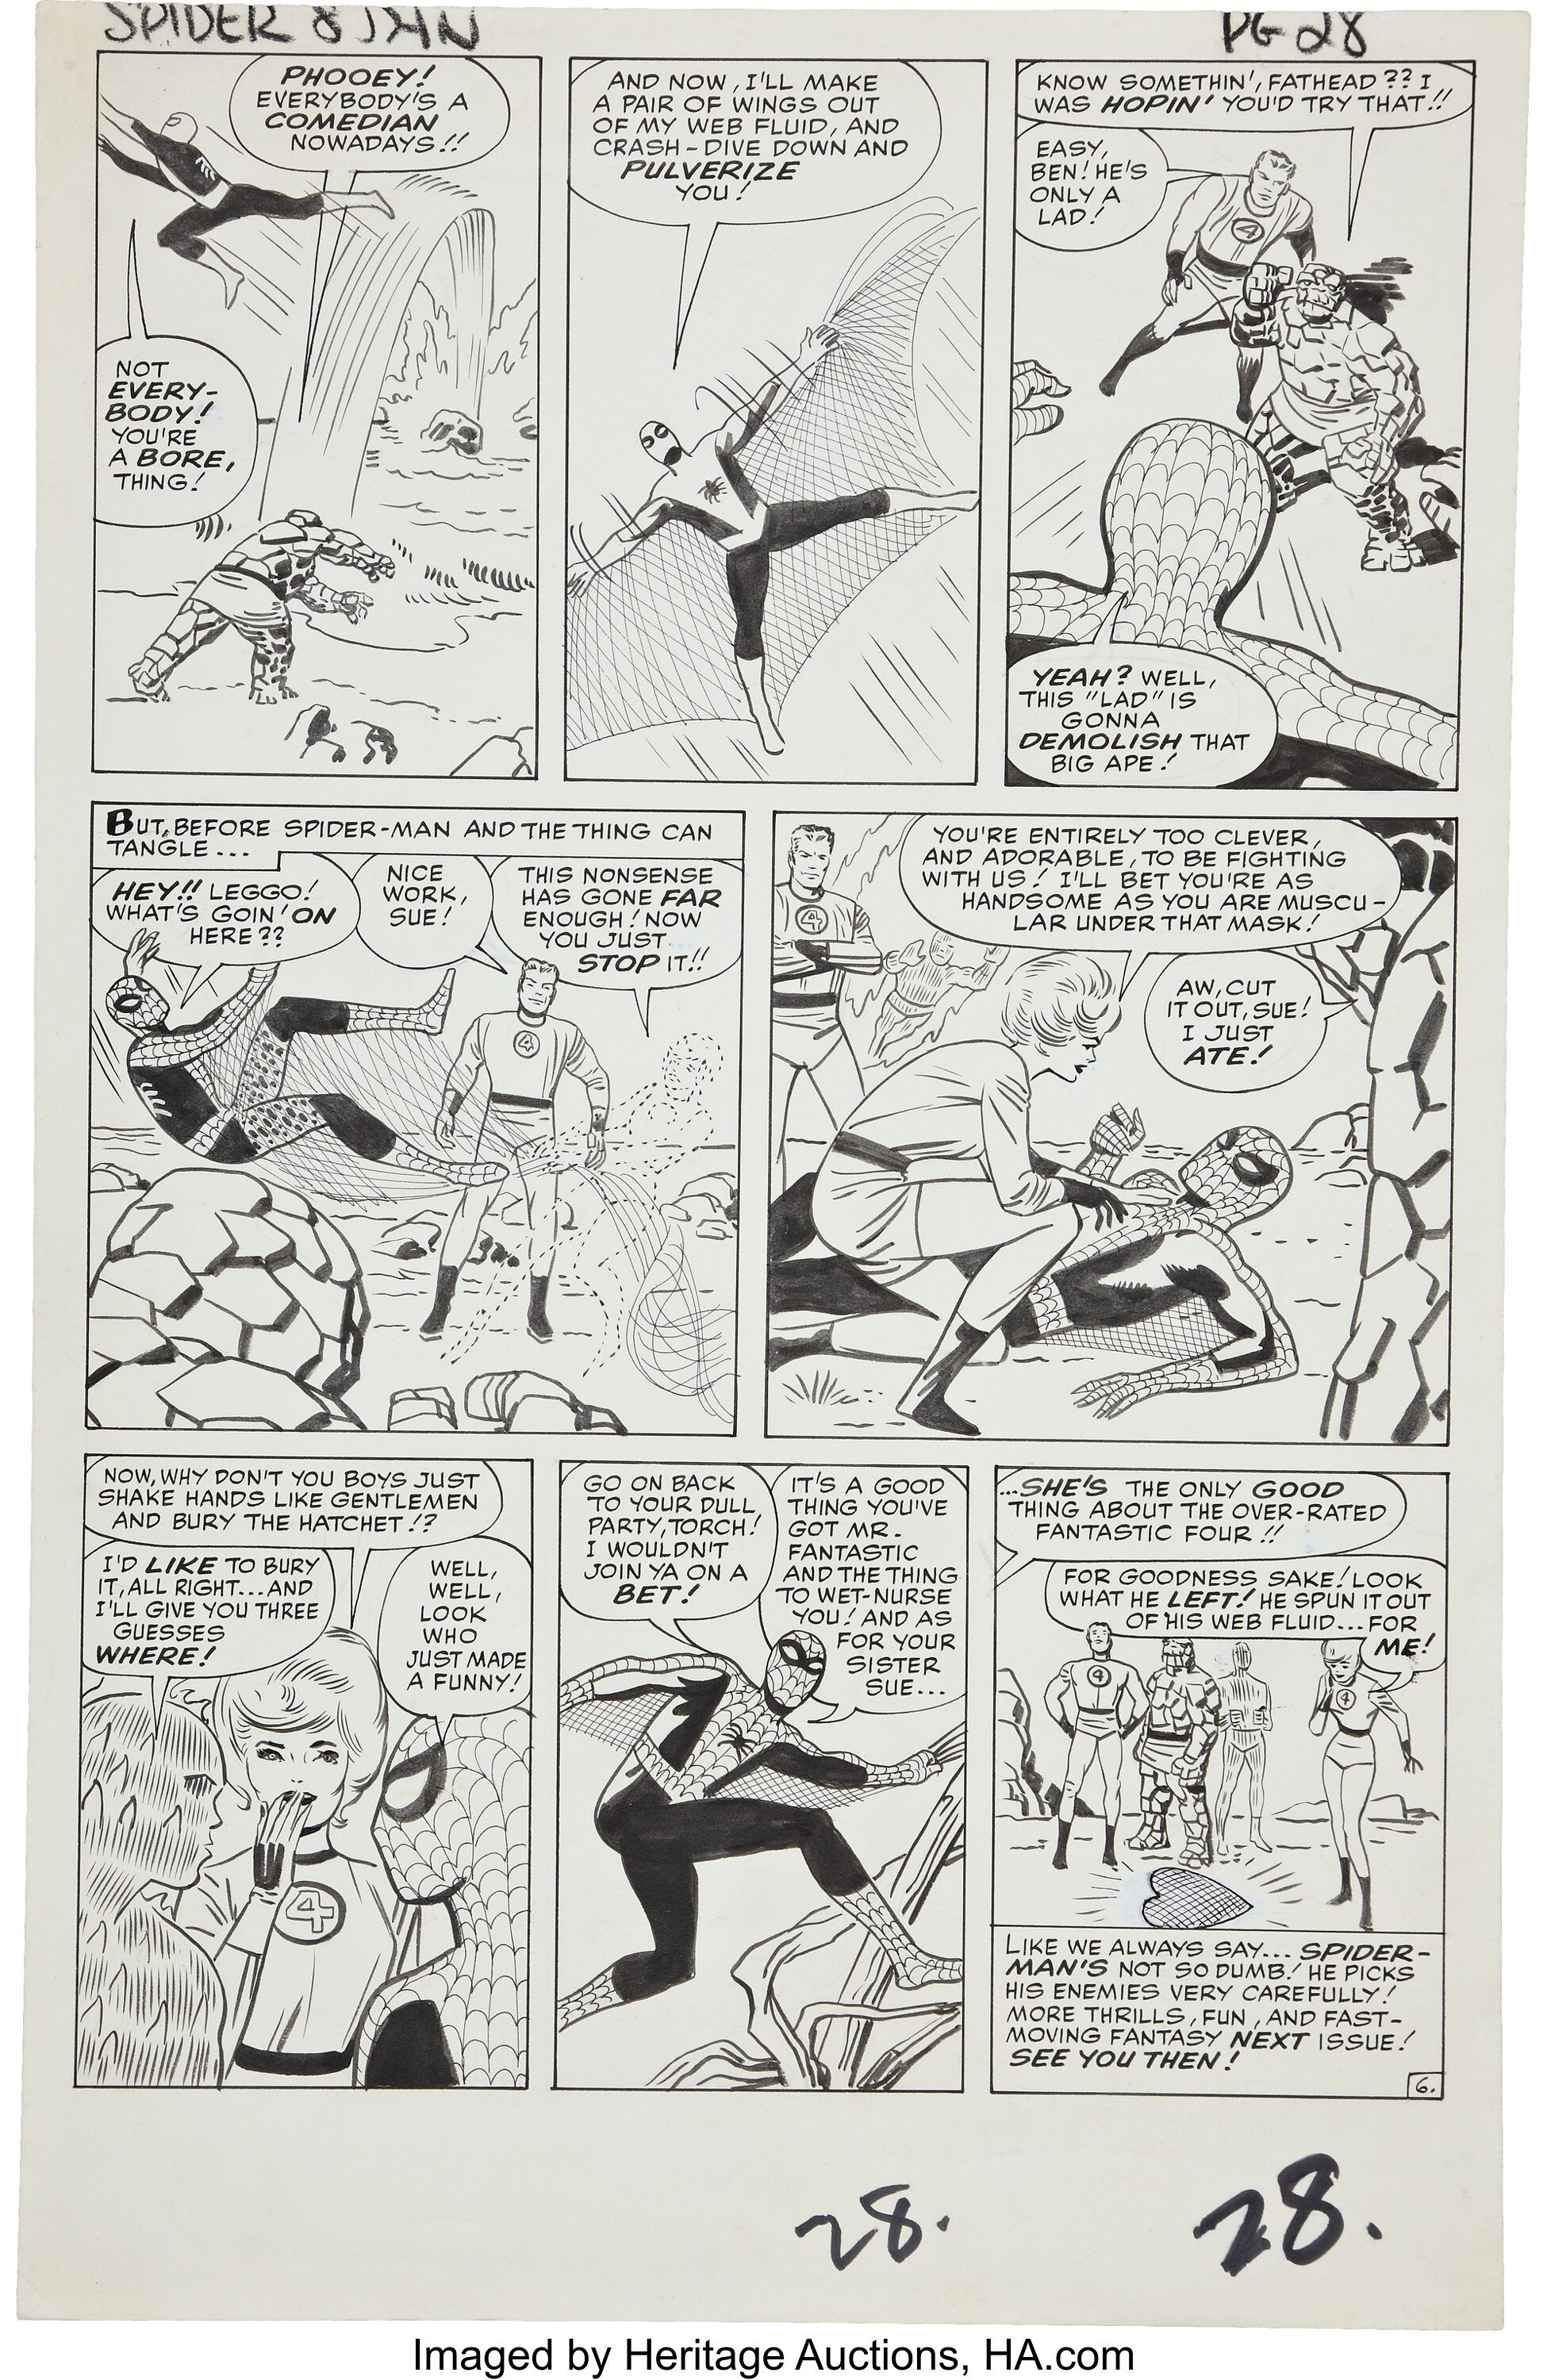 Jack Kirby and Steve Ditko Amazing Spider-Man #8 